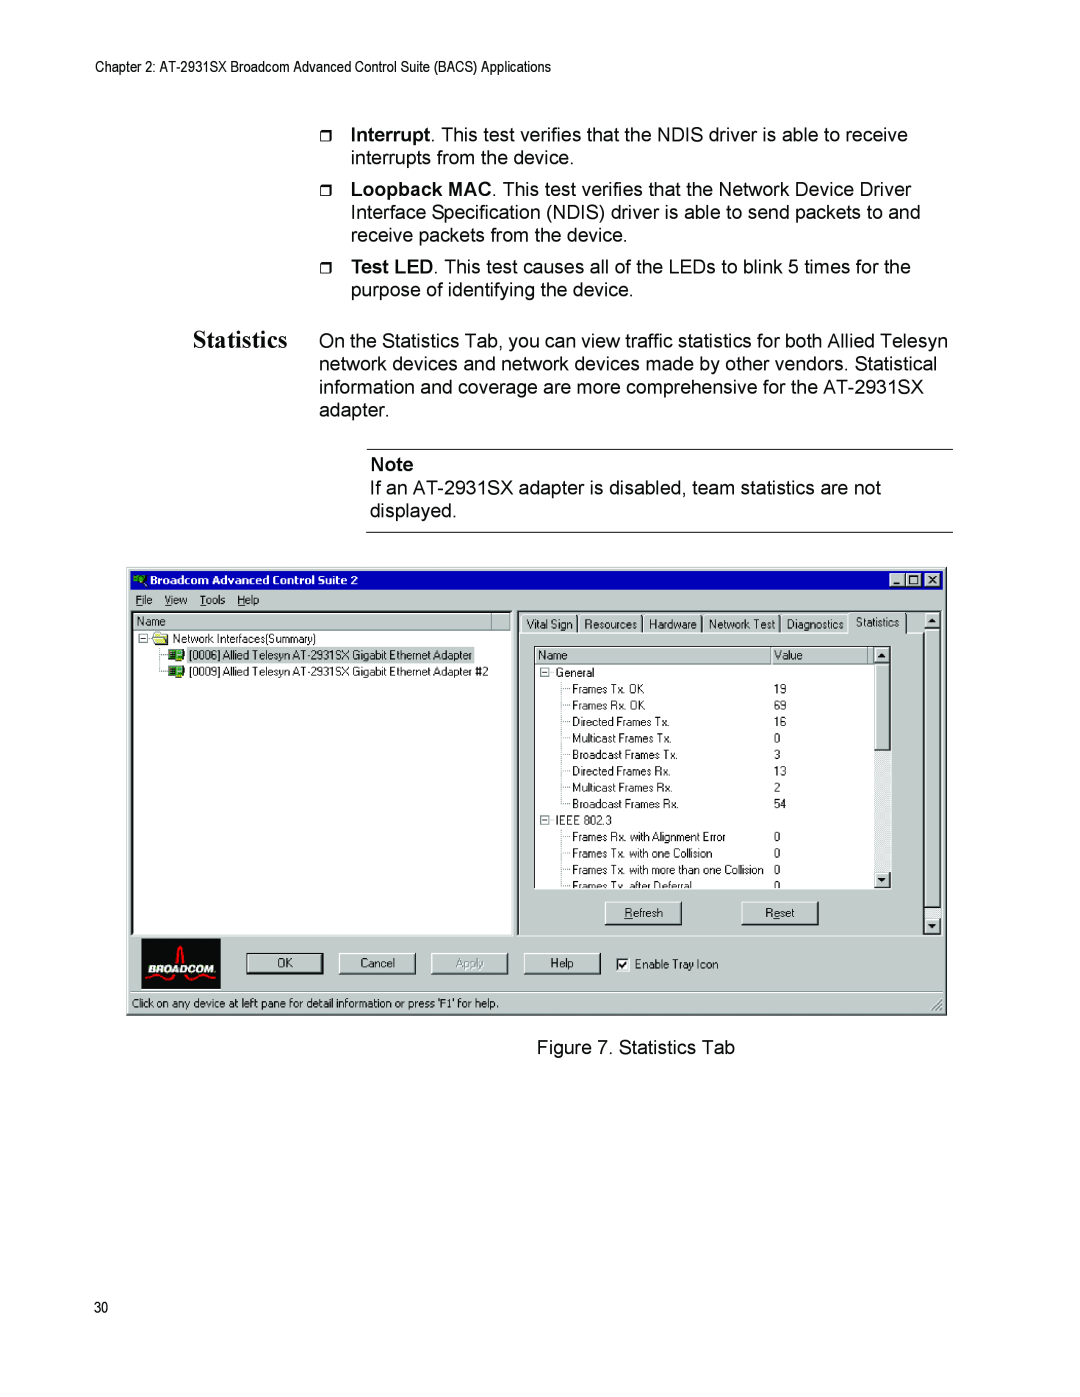 Allied Telesis manual If an AT-2931SX adapter is disabled, team statistics are not displayed 